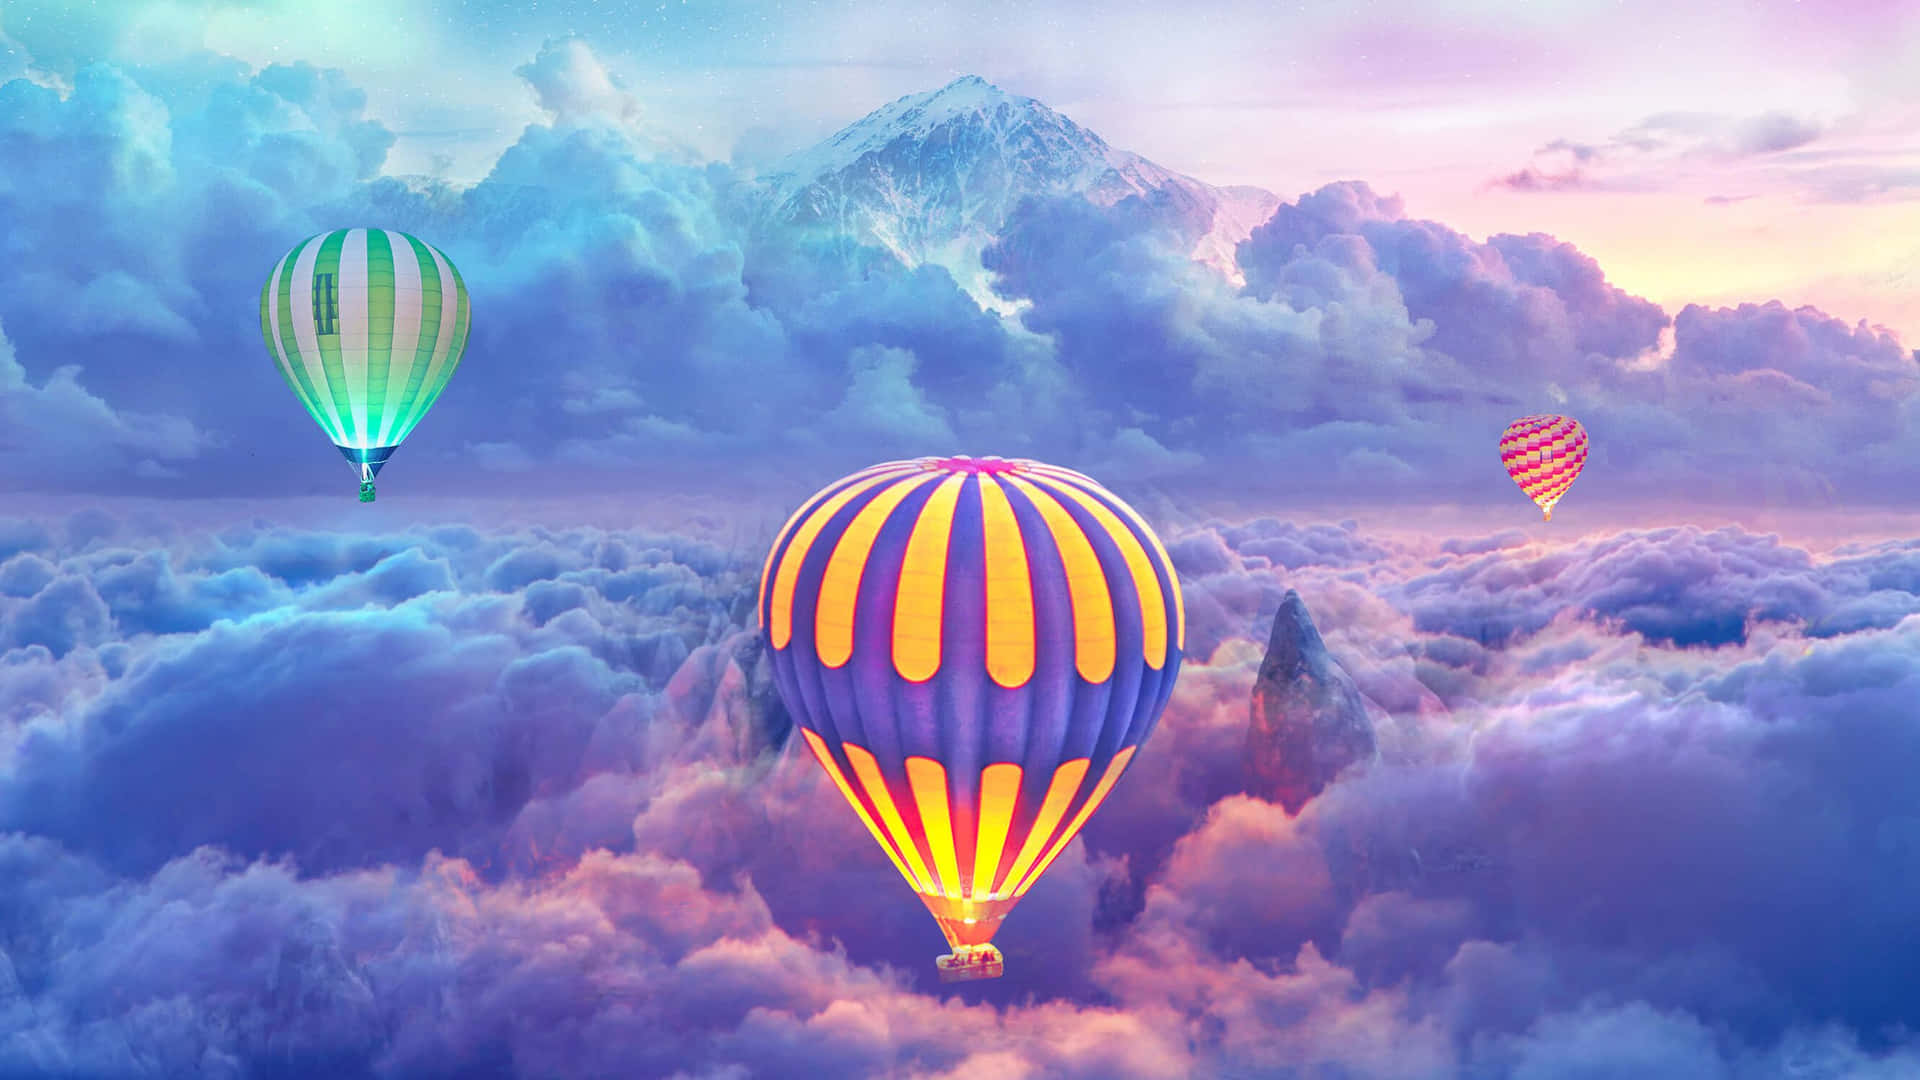 Witness the beauty of nature while soaring high in a hot air balloon